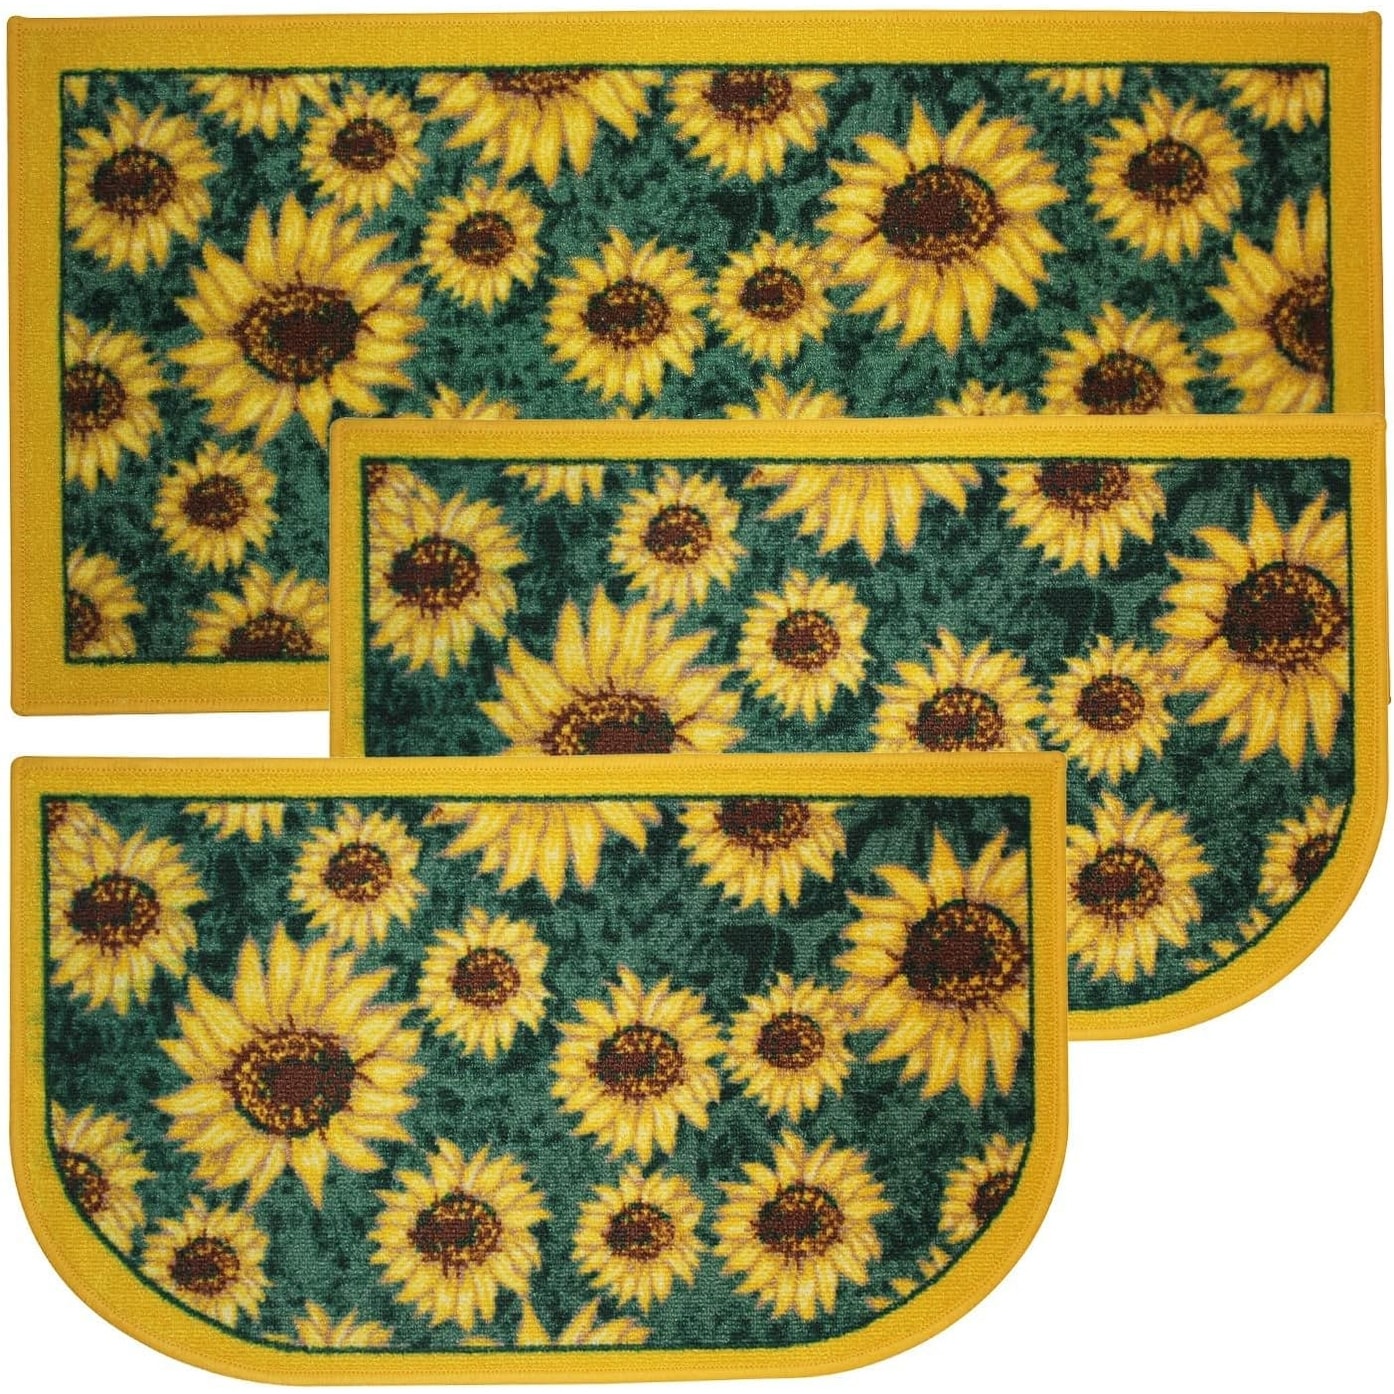 Bee Yellow Kitchen Mats for Floor, Flower Daisy Plaid Kitchen Rugs Set of 2  Carpet Area Rug, Floral Farmhouse Bee Kitchen Decor and Accessories Stuff,  Yellow Black White, 17x30 and 17x47 Inch 